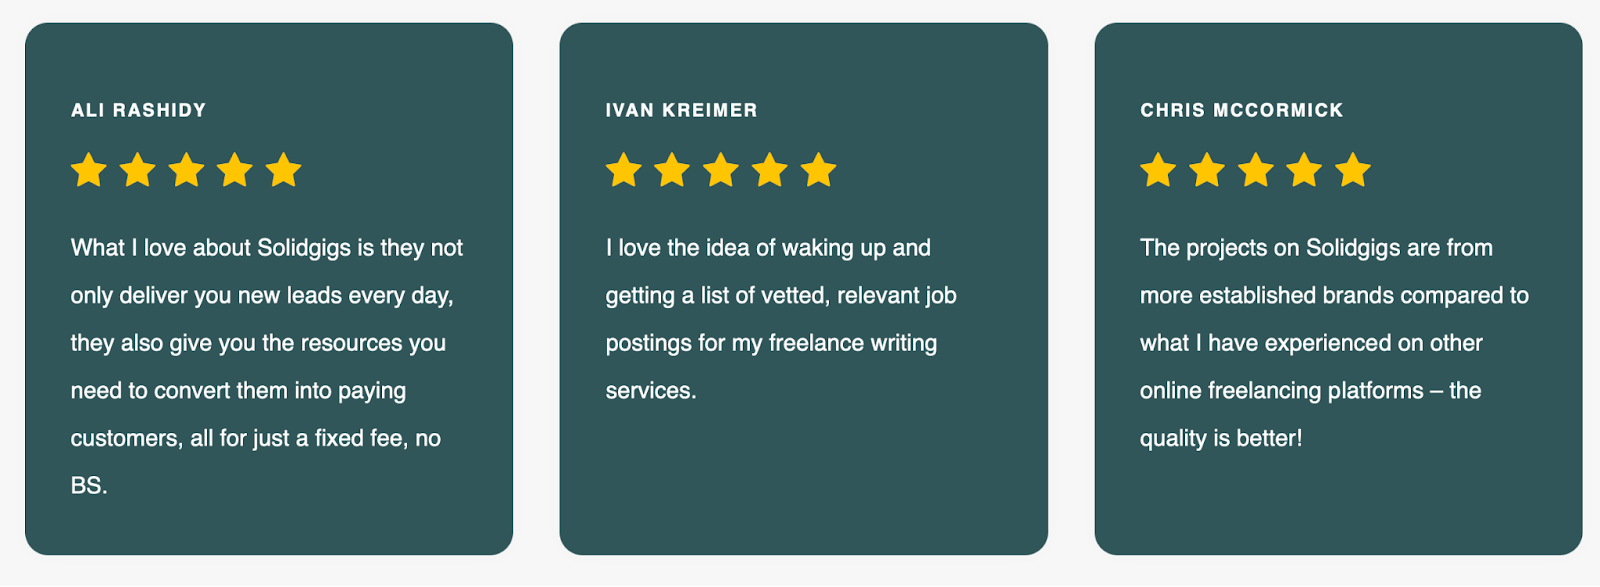 Fiverr V. SolidGigs – Which Freelance Site Is Best?